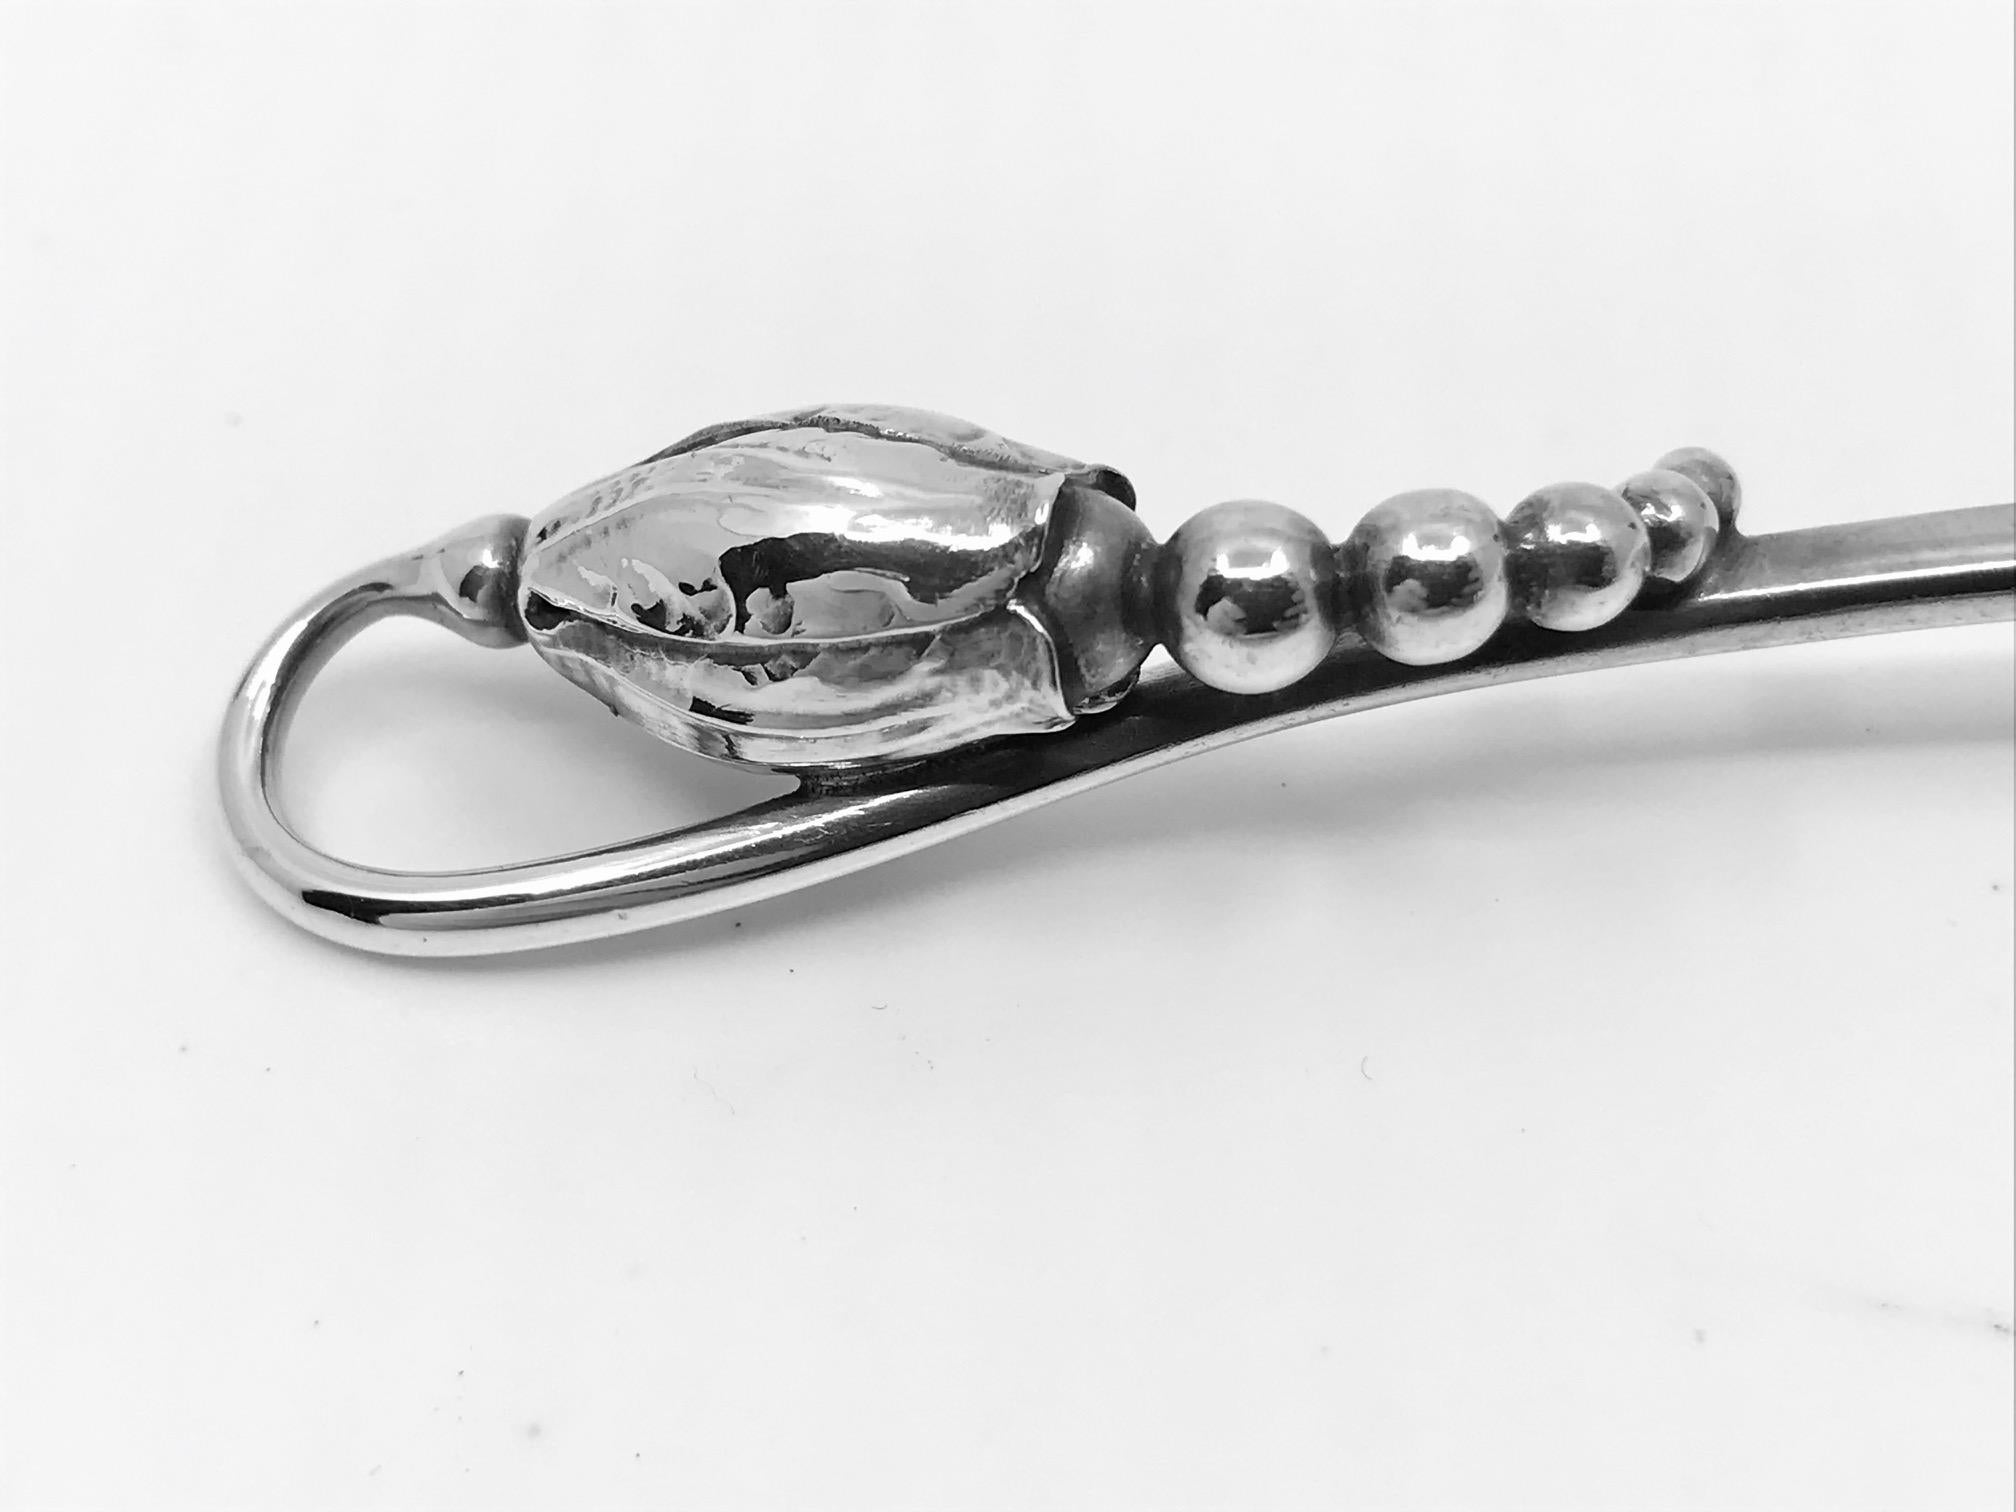 This is a sterling silver Georg Jensen gravy ladle, item 153 in the Blossom/Magnolia pattern, design #84 by Georg Jensen from 1919.

Additional information:
Material: Sterling silve
Style: Art Nouveau
Hallmarks: With Georg Jensen hallmark, made in